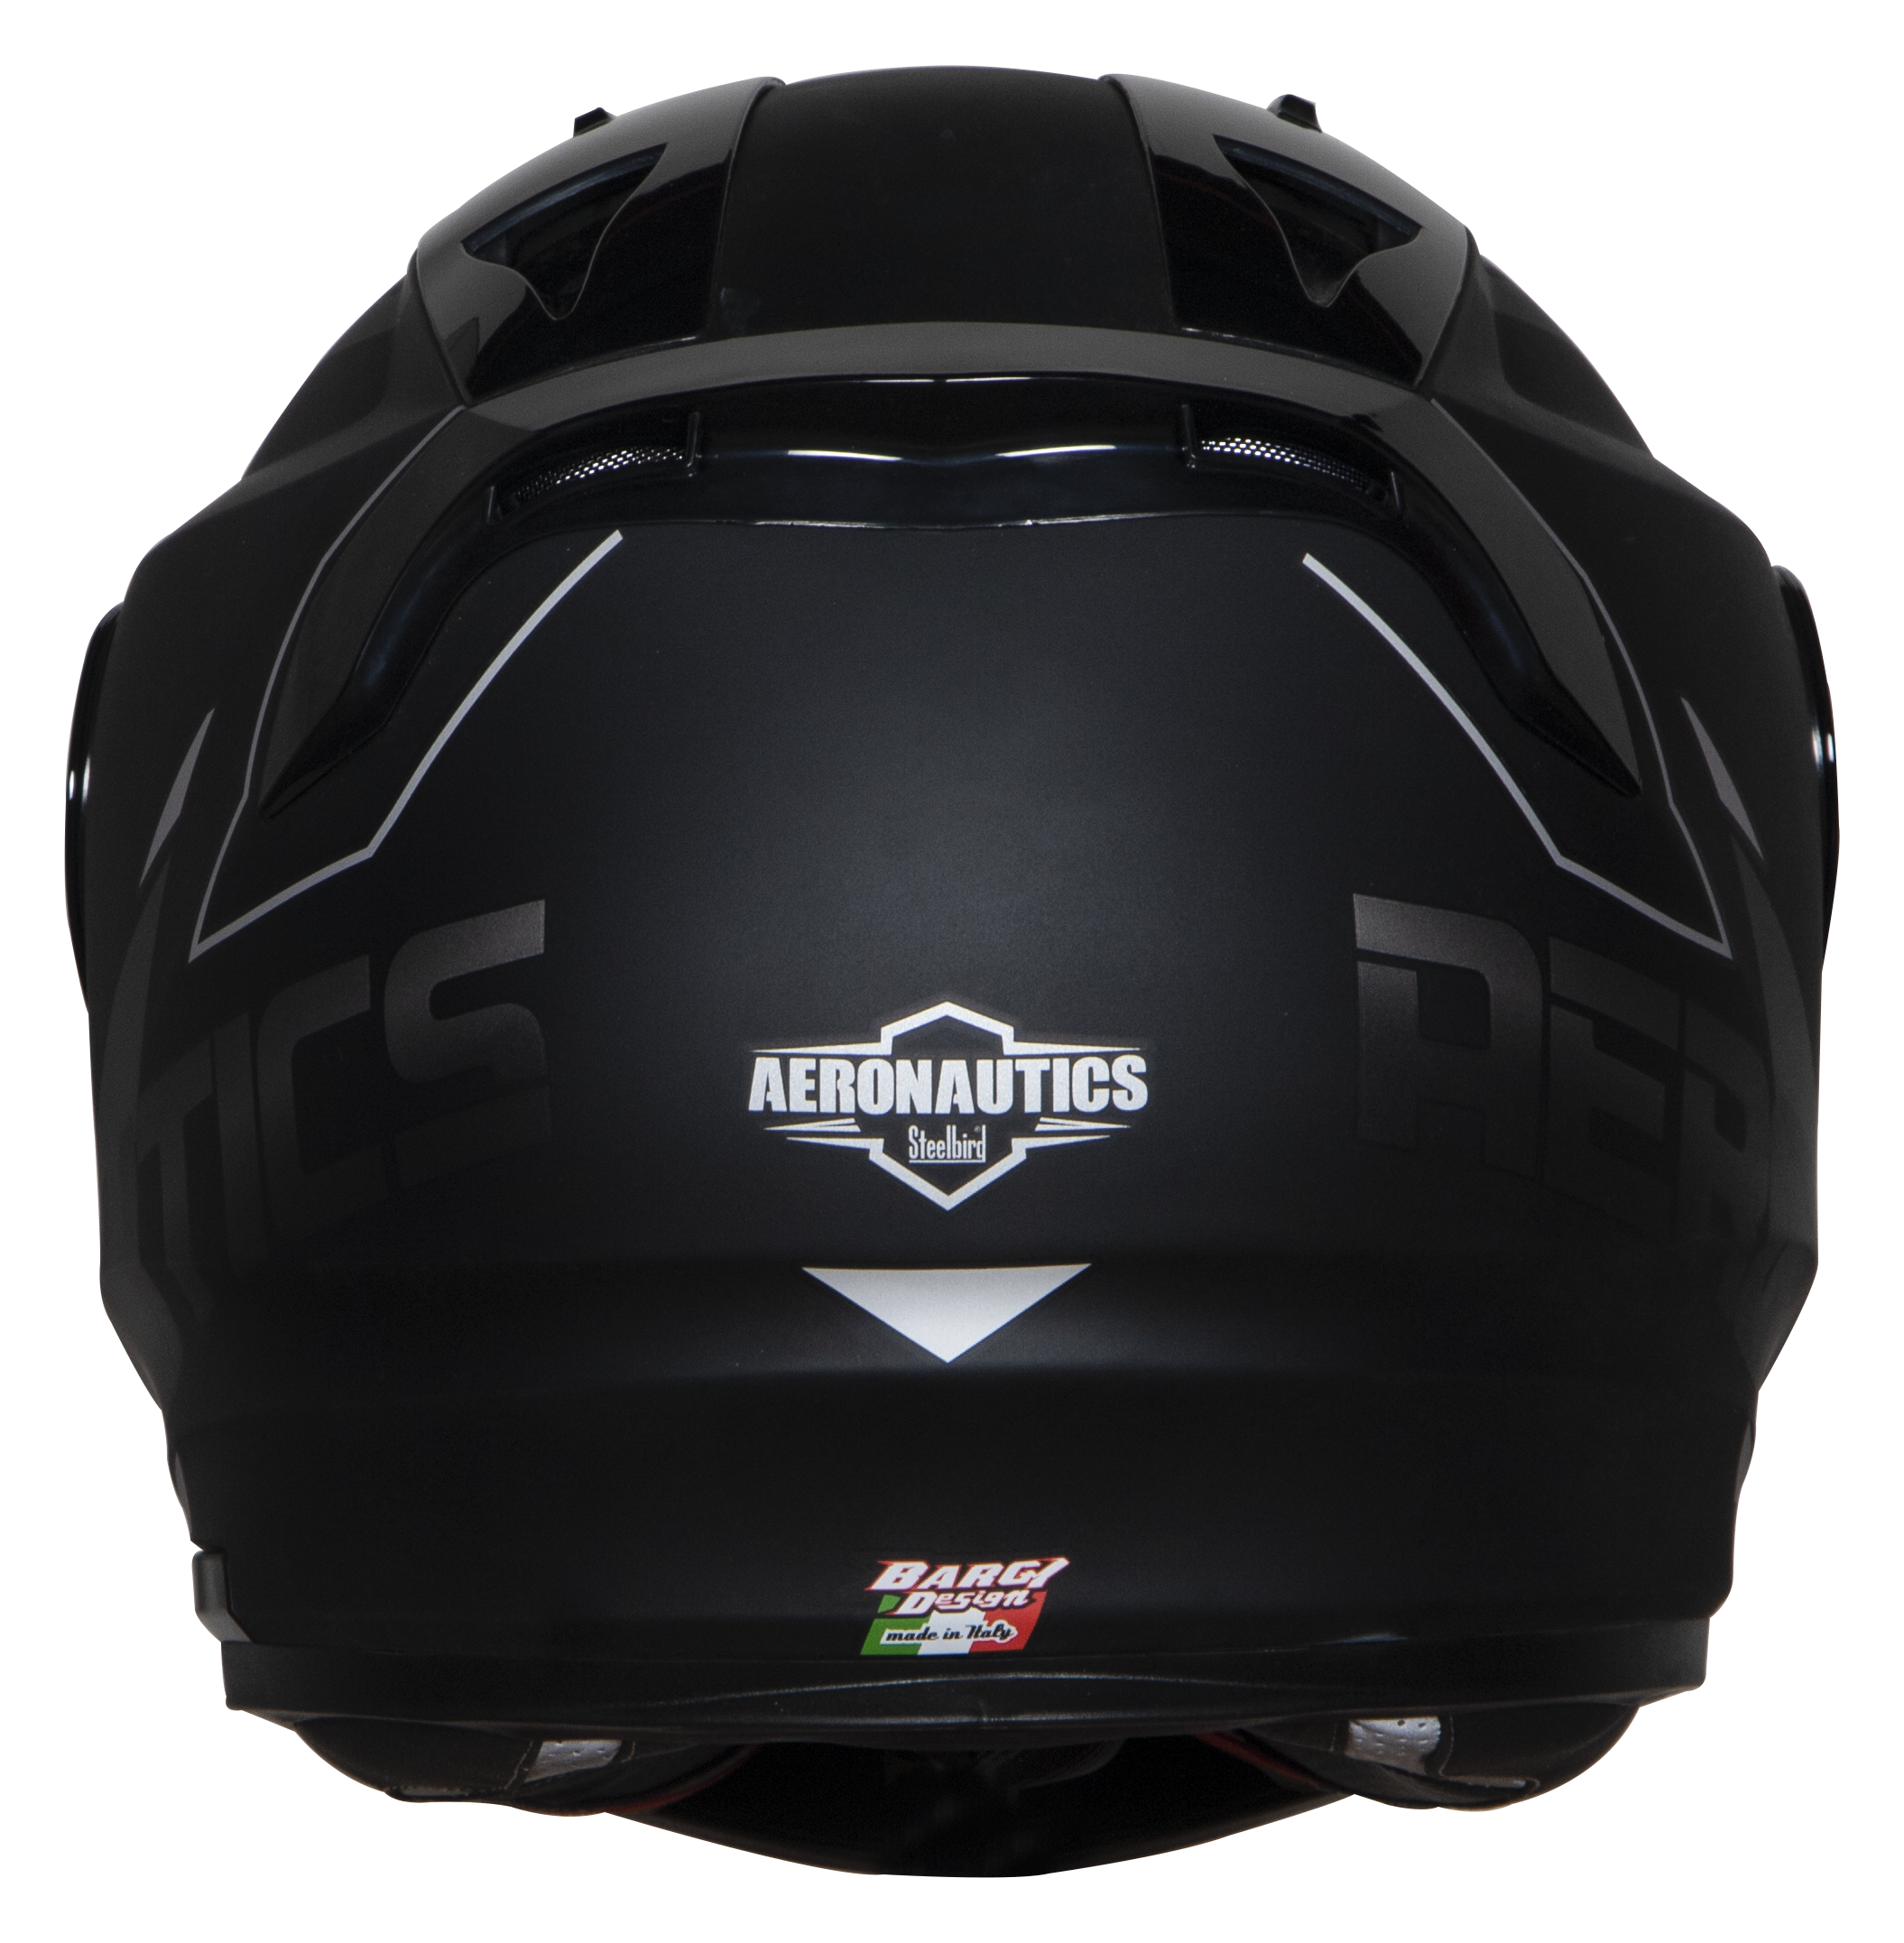 SA-1 RTW Mat Black/White With Anti-Fog Shield Green Night Vision Visor(Fitted With Clear Visor Extra Green Night Vision Anti-Fog Shield Visor Free)